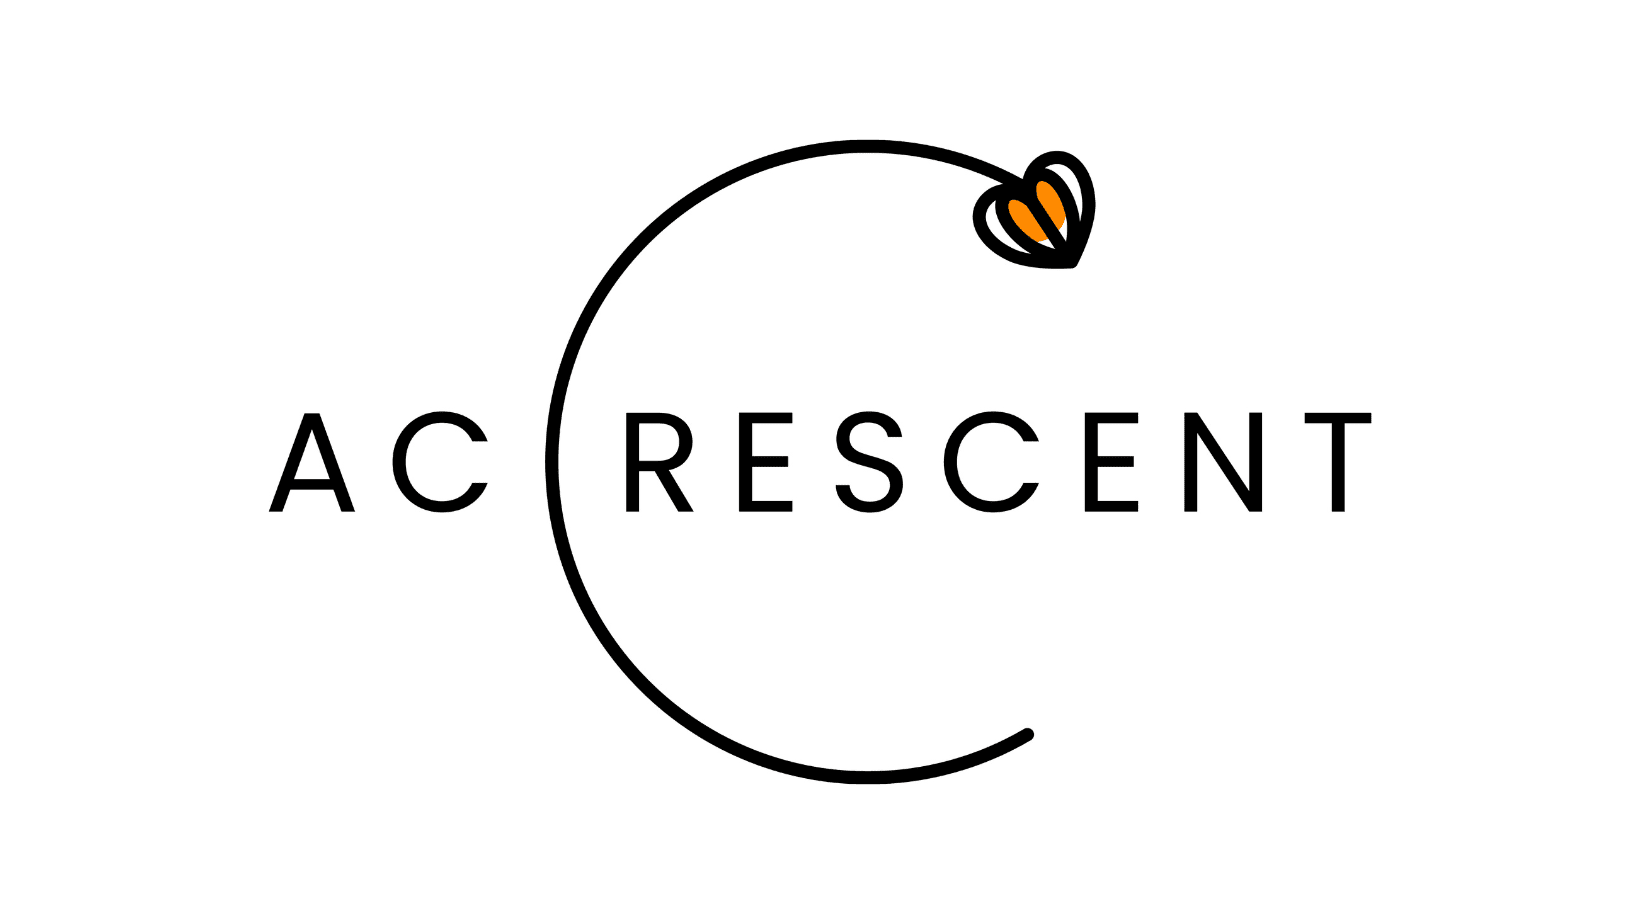 ACCRESCENT   Therapy Services